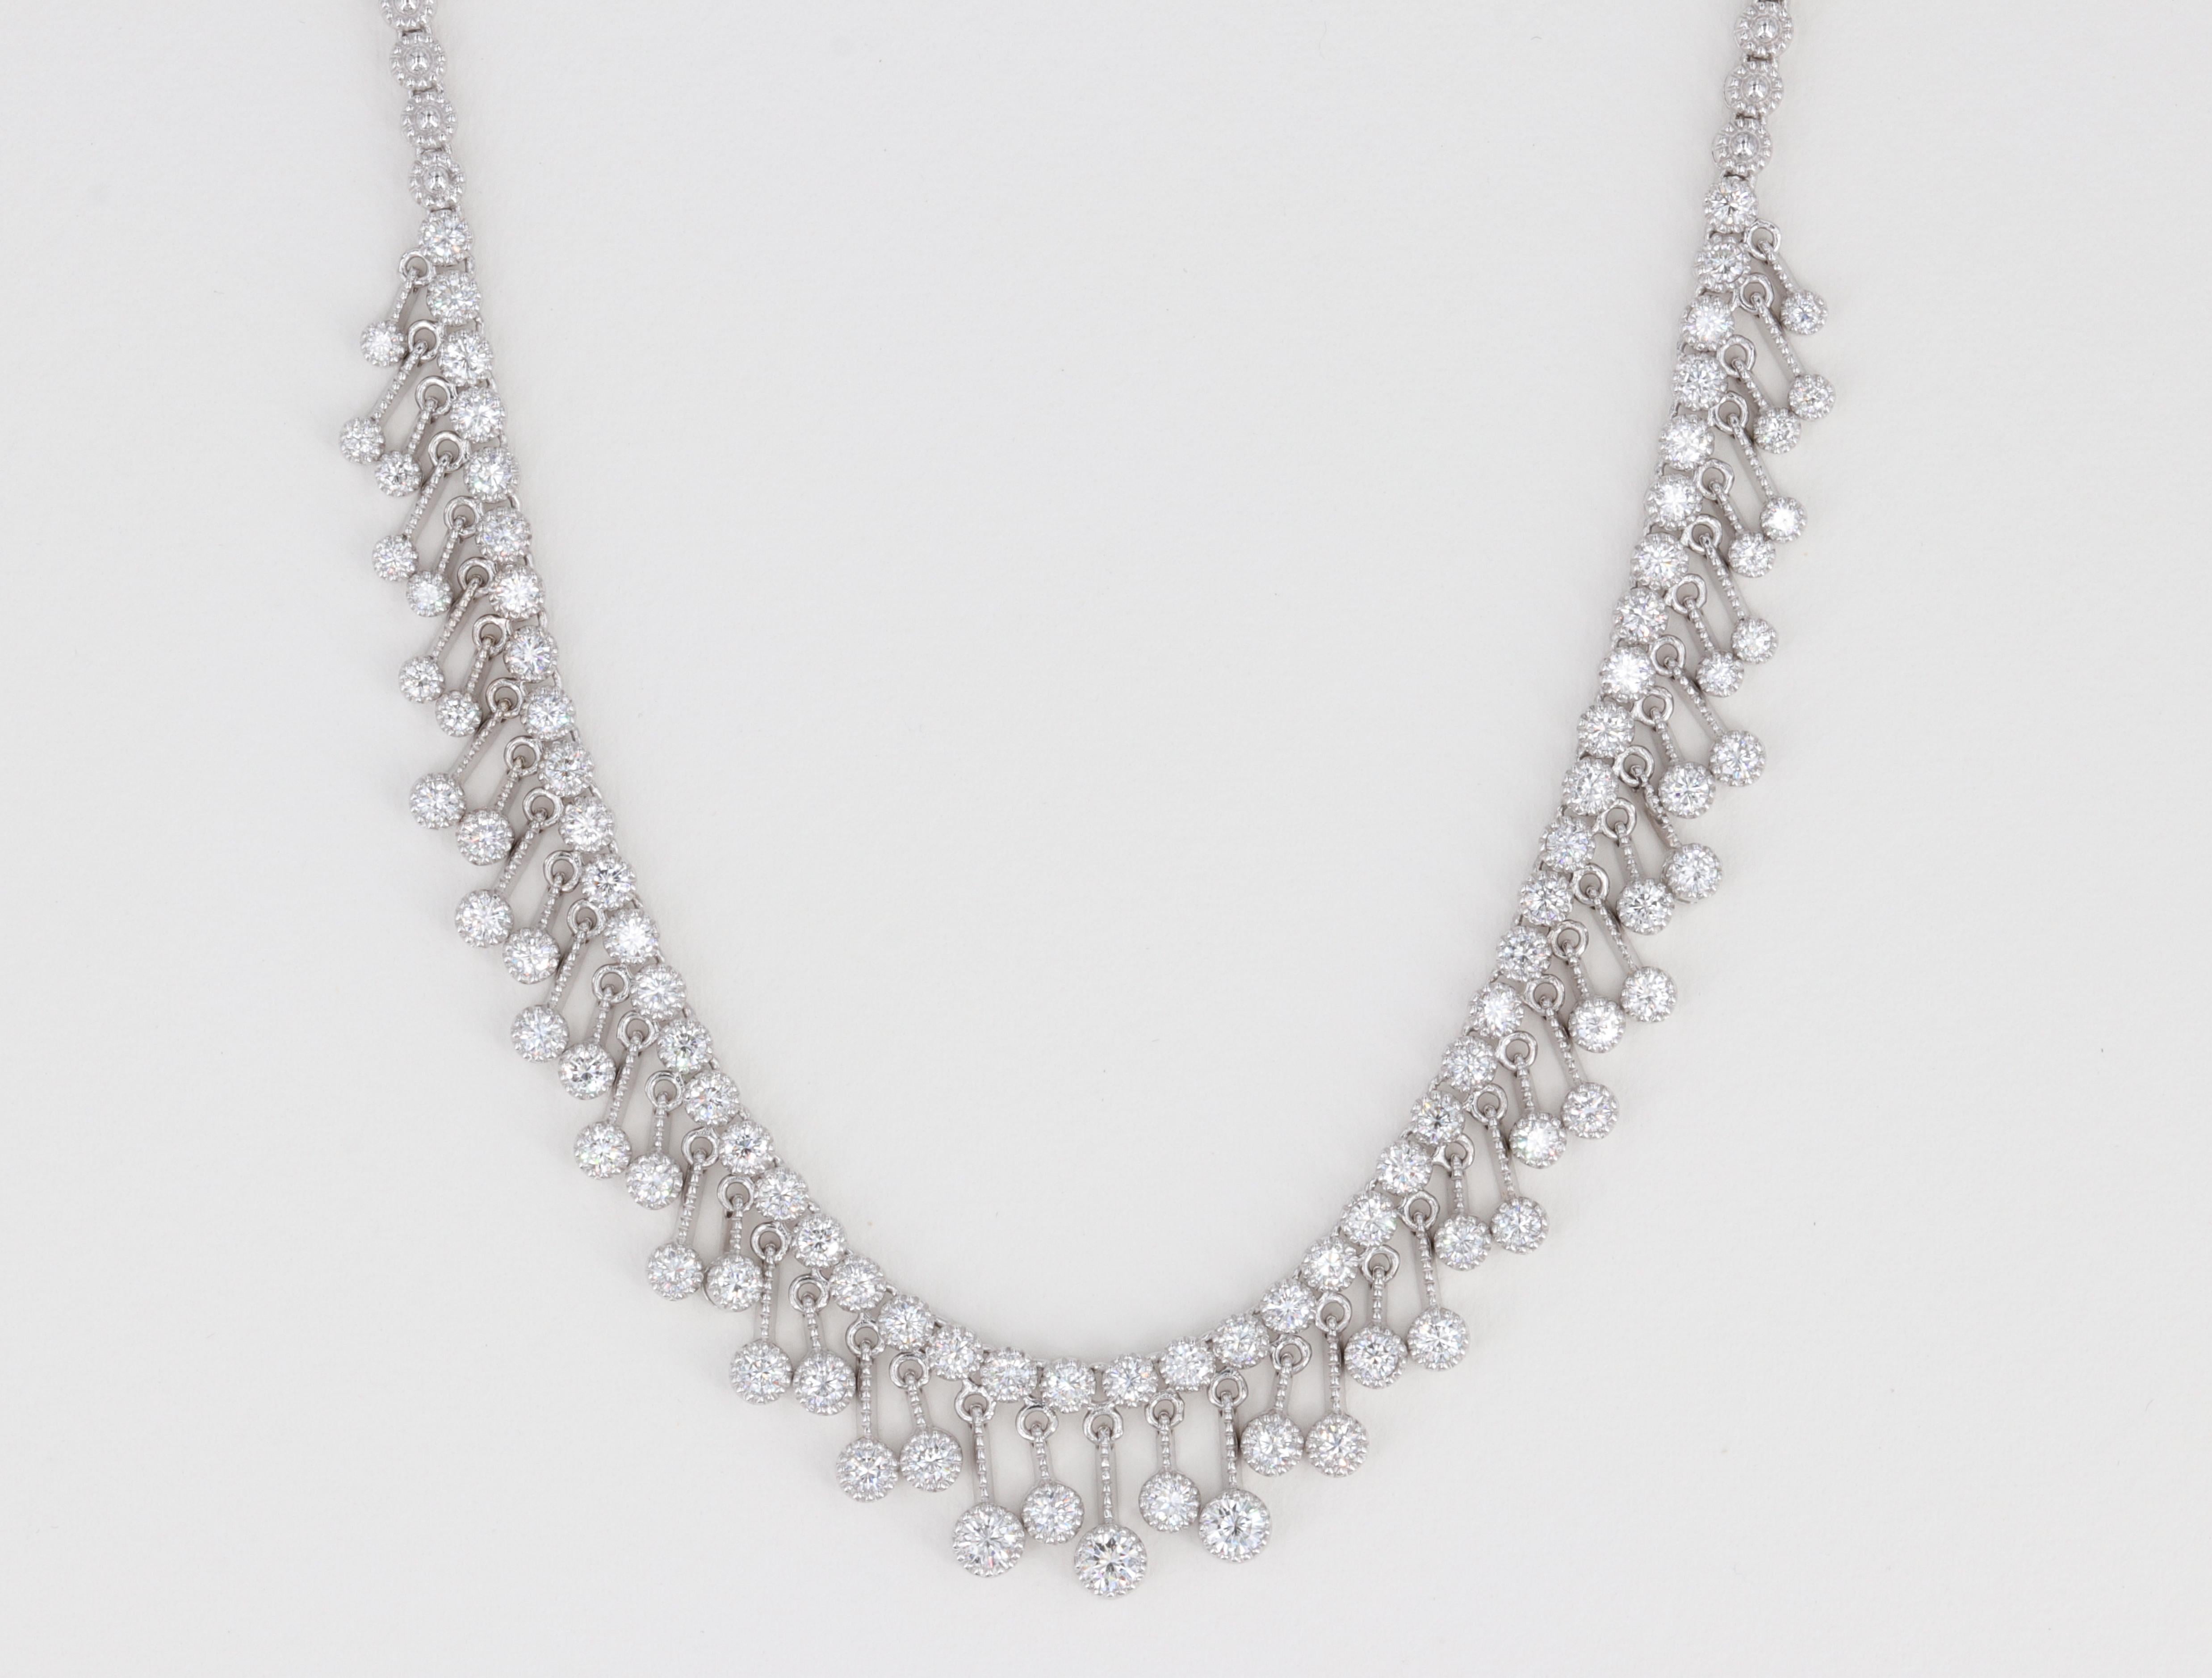 Piero Milano Diamond Necklace Containing Approximately 5 Carats of Fine White Diamonds Set in 18k White Gold.

Diamonds:

Weight - 95 stones = Approximately 5.00 Carats
Color - D to F
Clarities - VS plus 
Shape - Round Brilliant 

Necklace:

Length